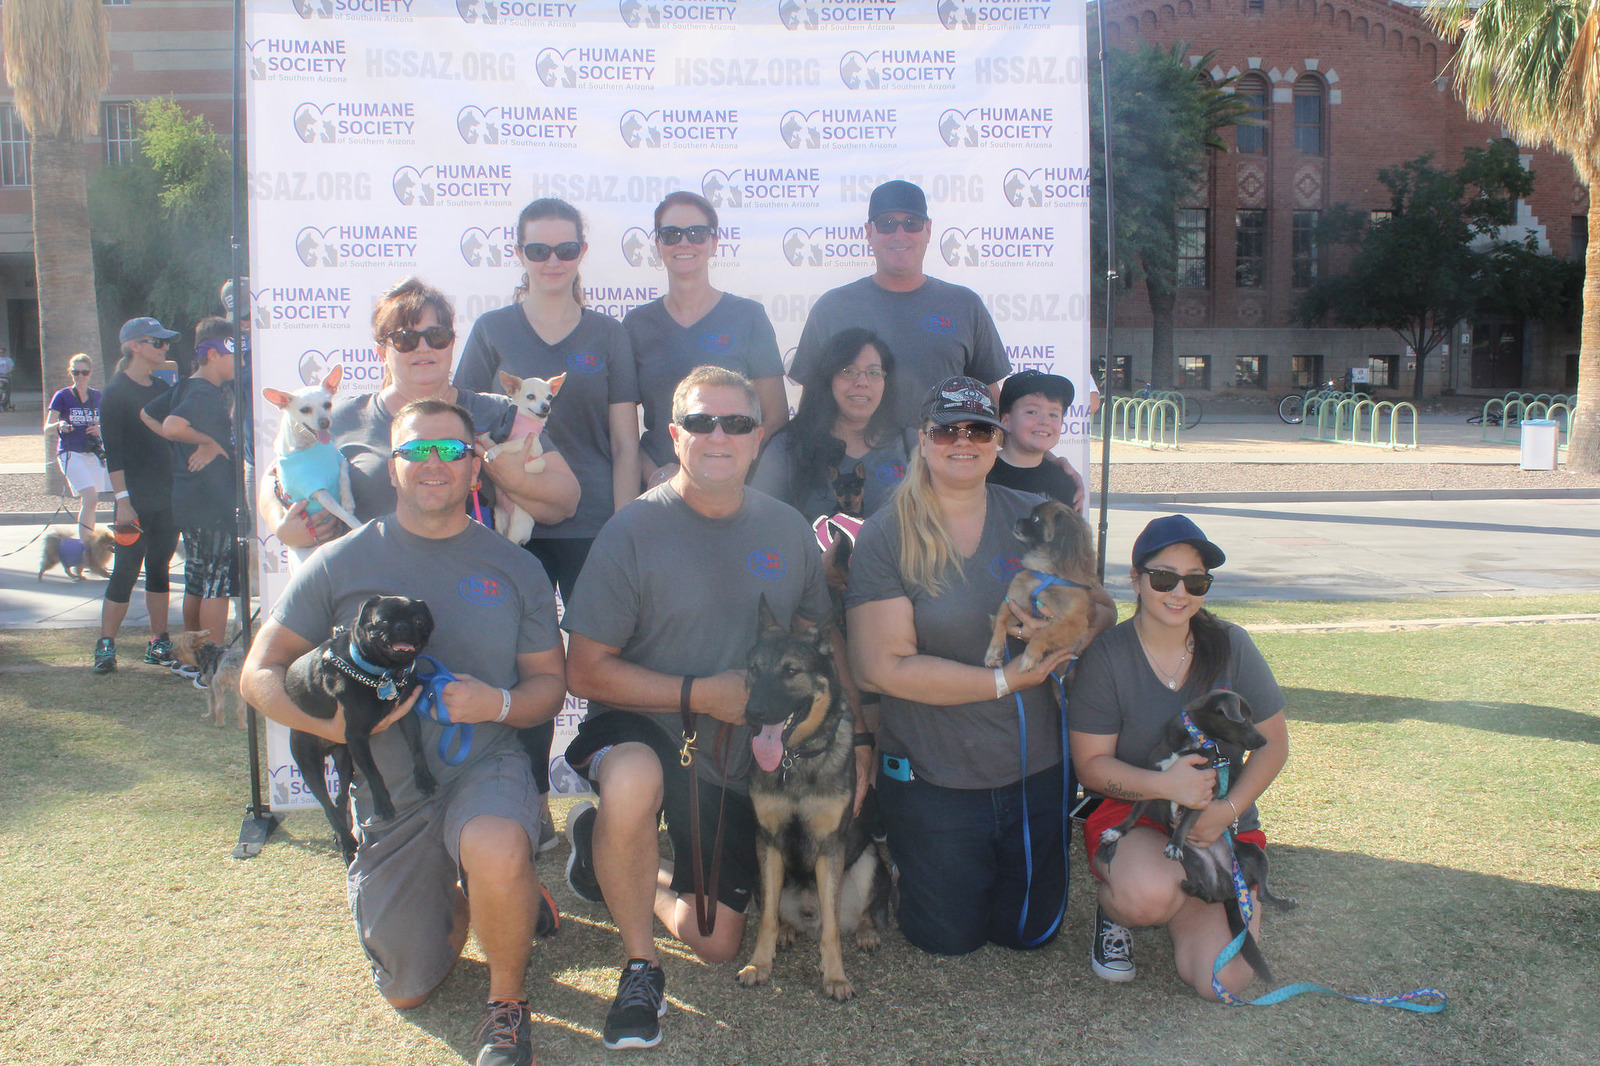 D&H AC team at the Humane Society event